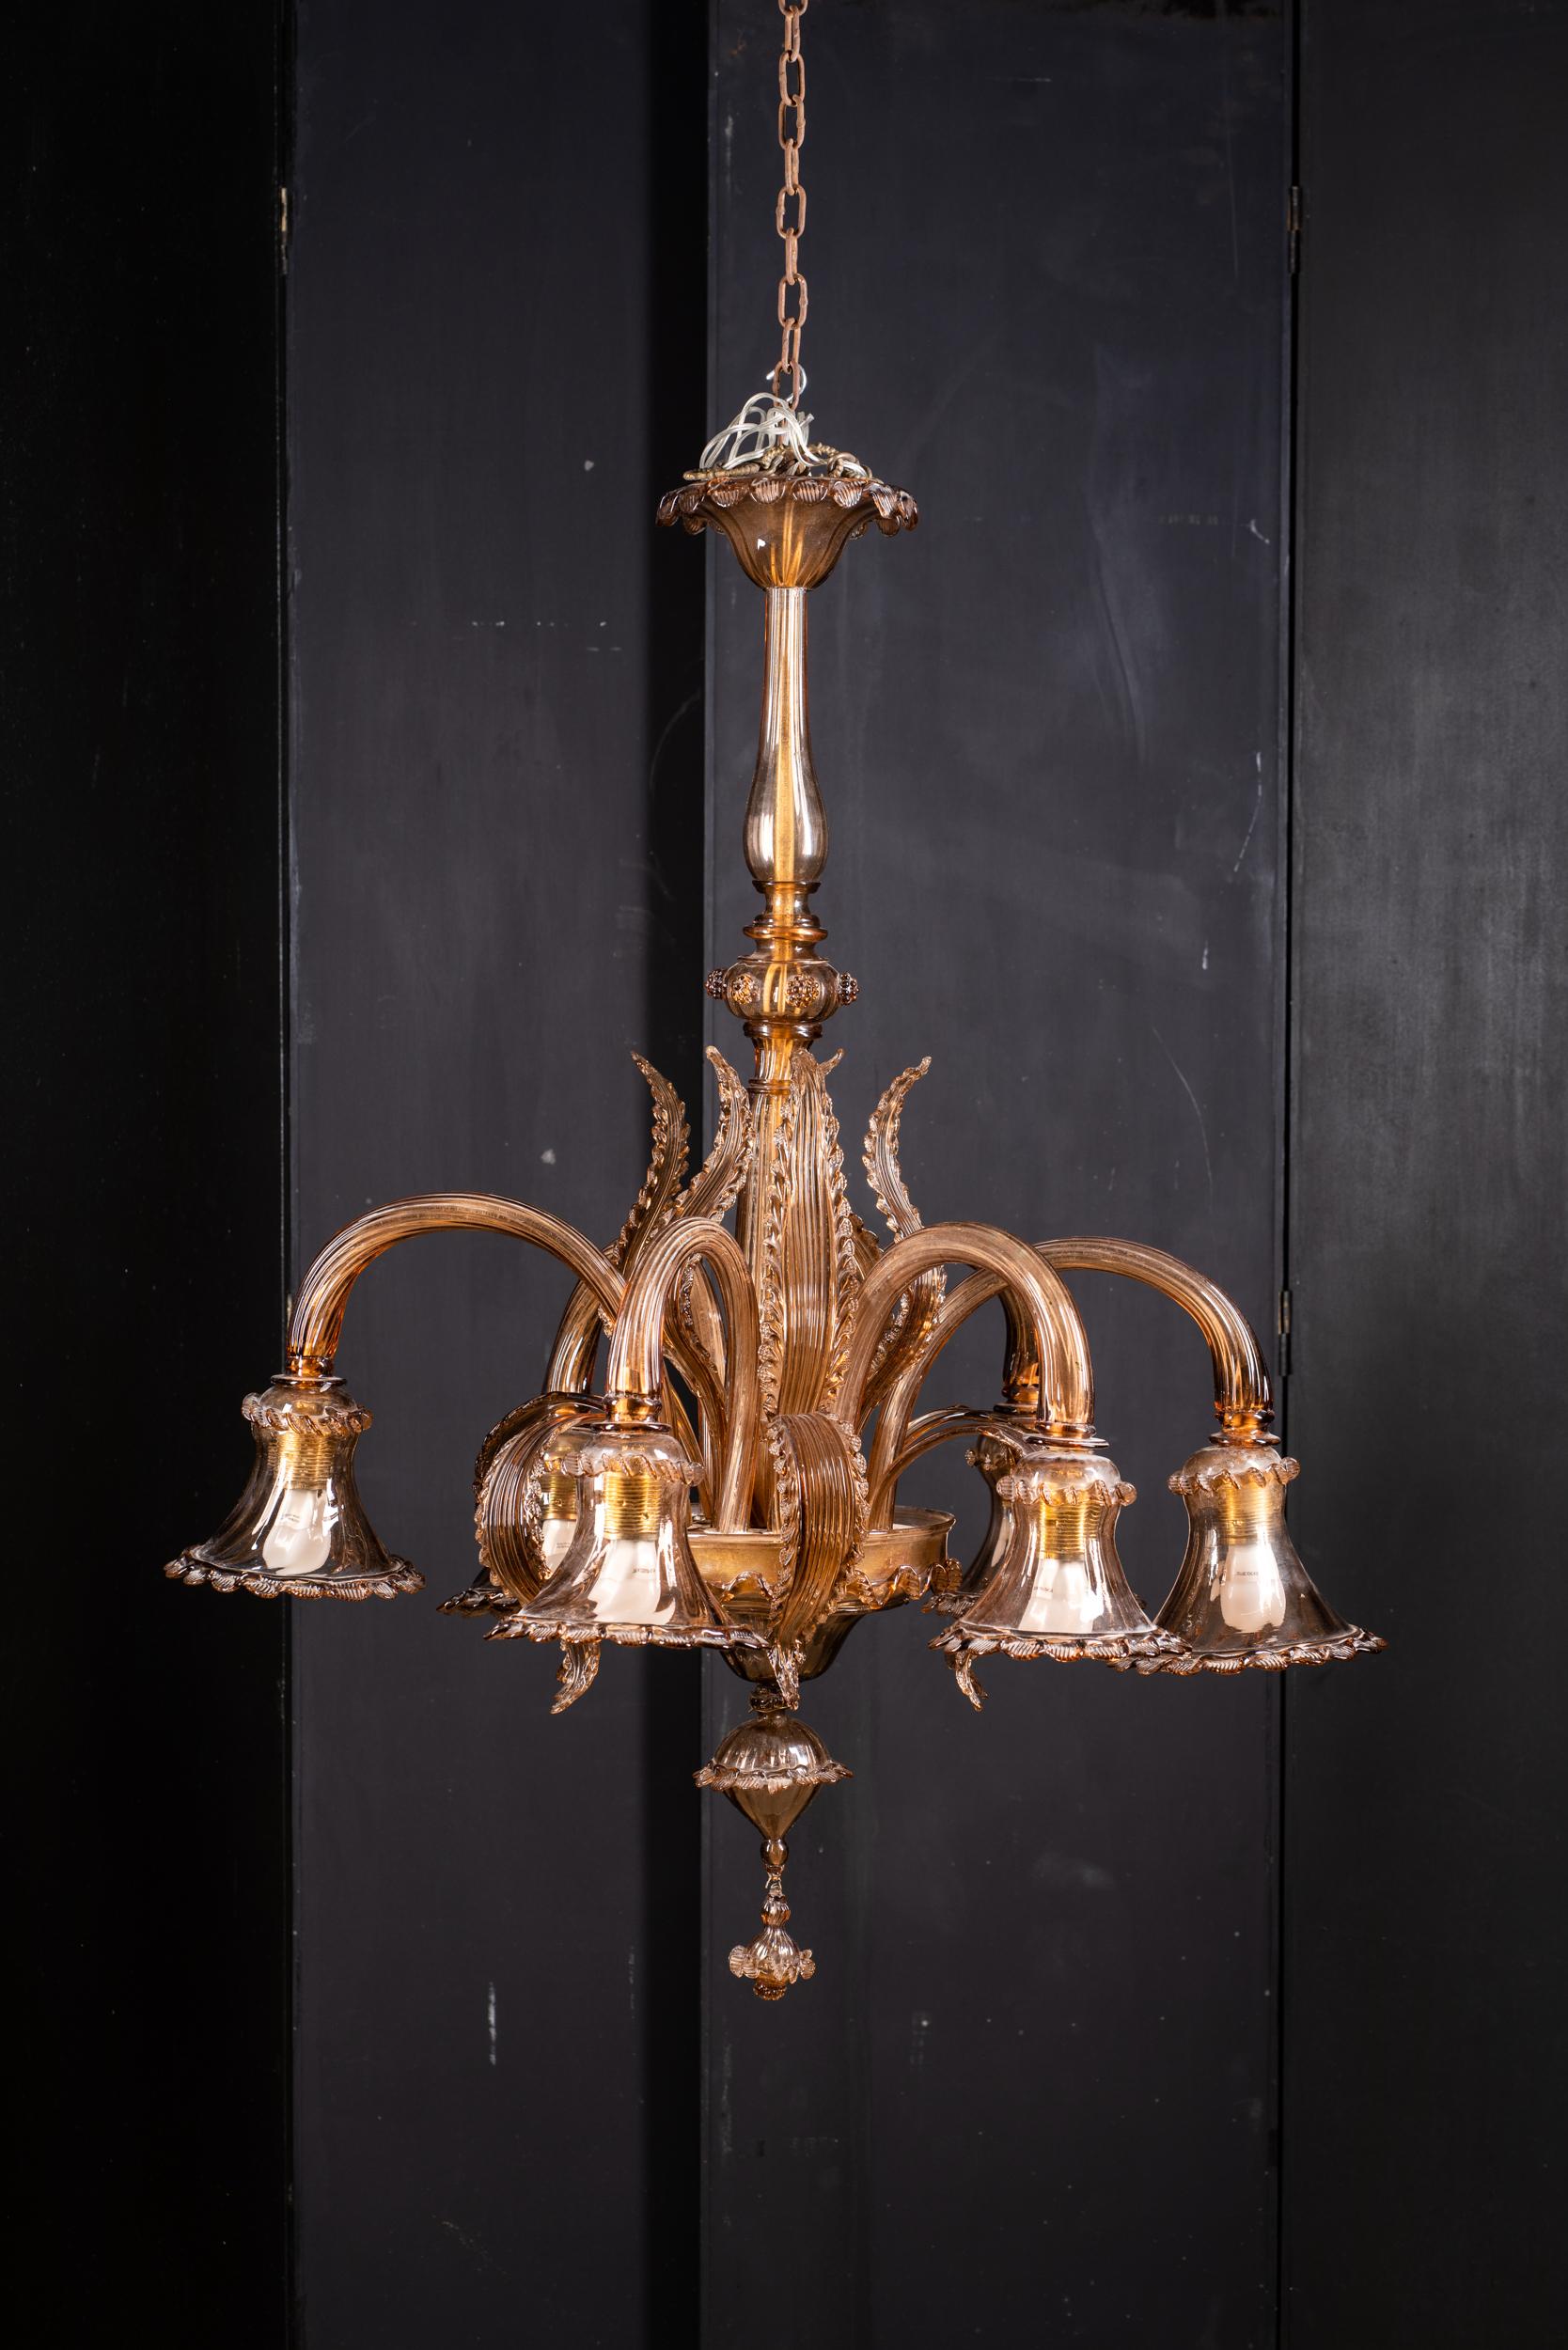 Important six-arm chandelier finely worked in Murano glass, with acanthus leaf motifs and arms with striped canes
Murano (Venice) glass colored with shades from purple/pink to burnt earth brown
The chandelier is in excellent condition, the wiring